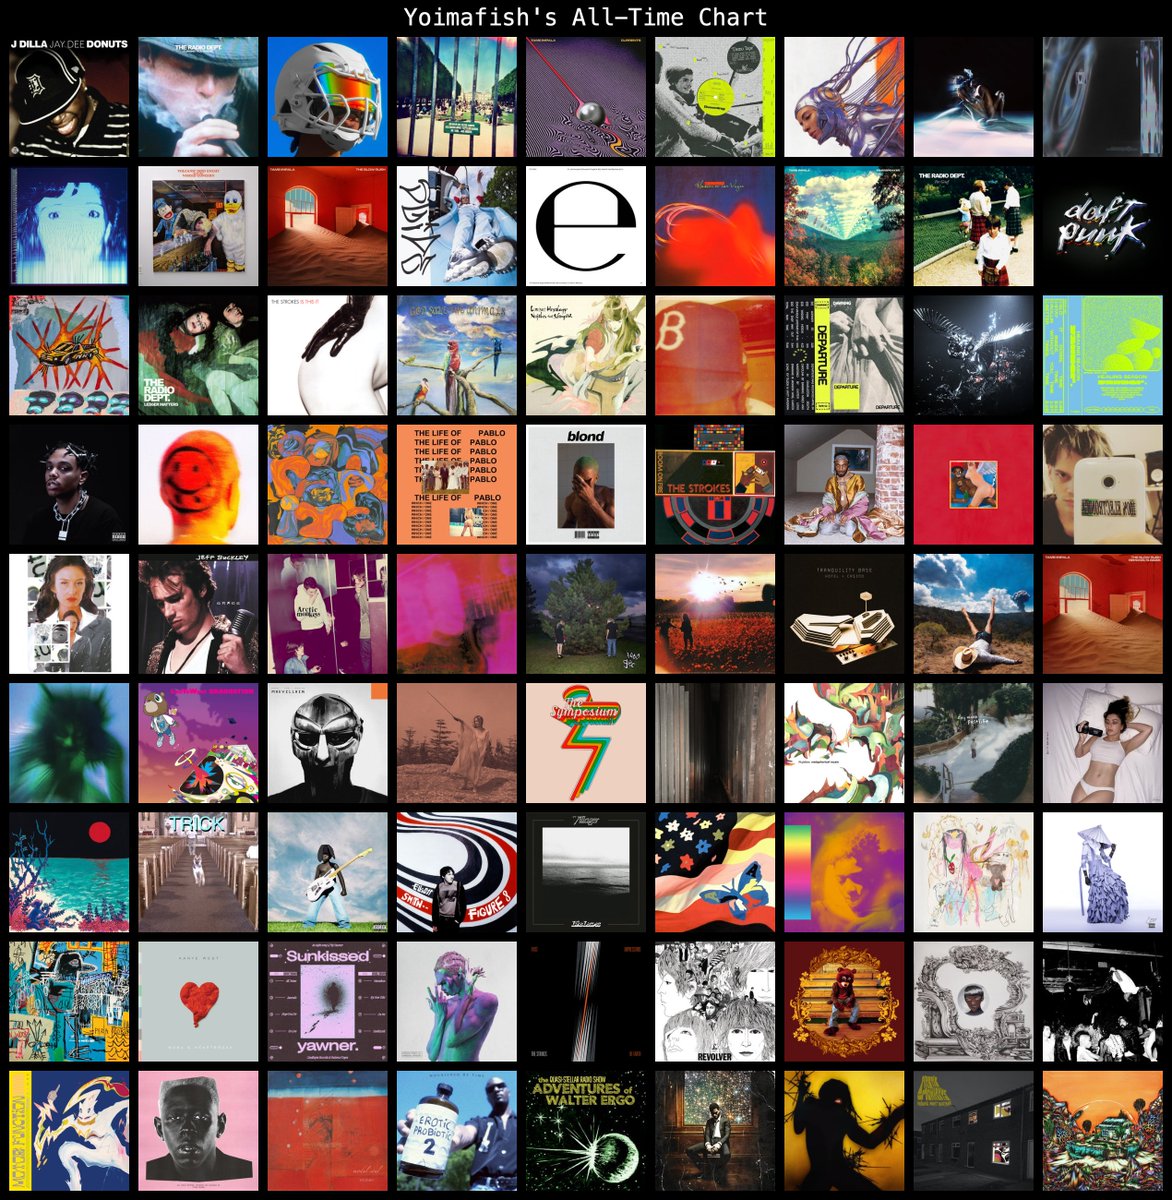 9x9 of my most listened to music ever (according to lastfm)